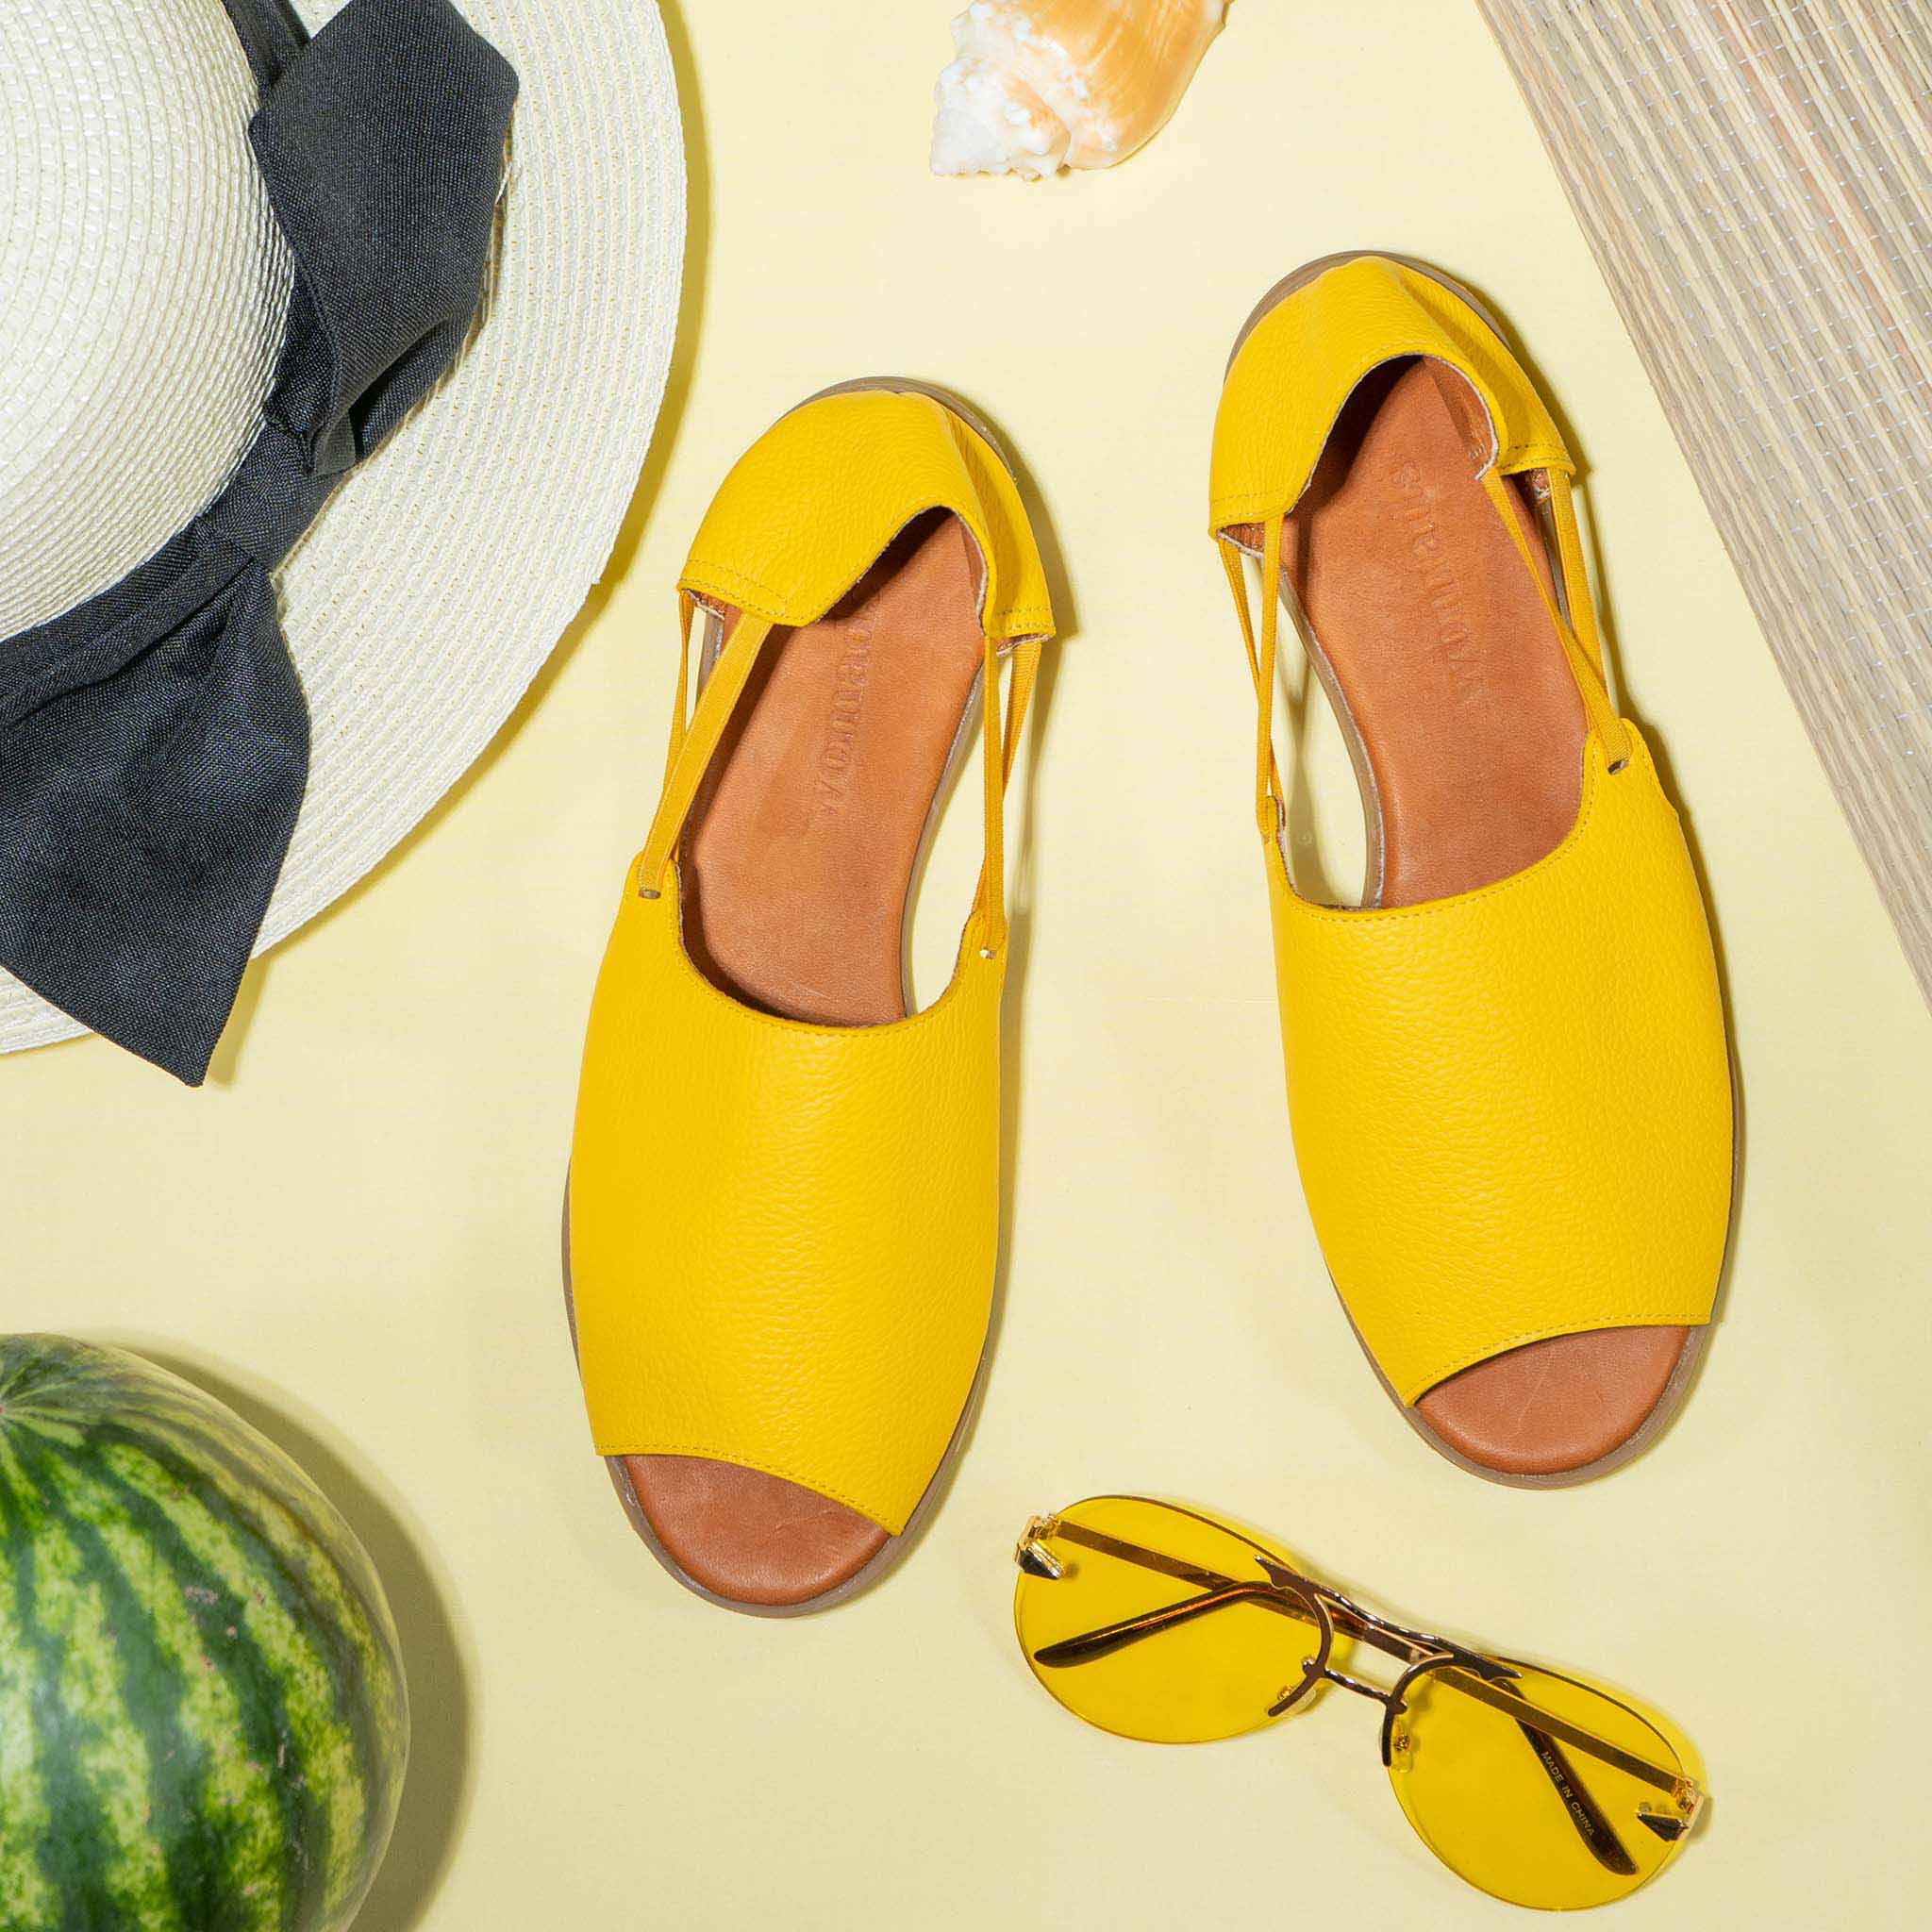 Womads yellow sandals with beach accessories